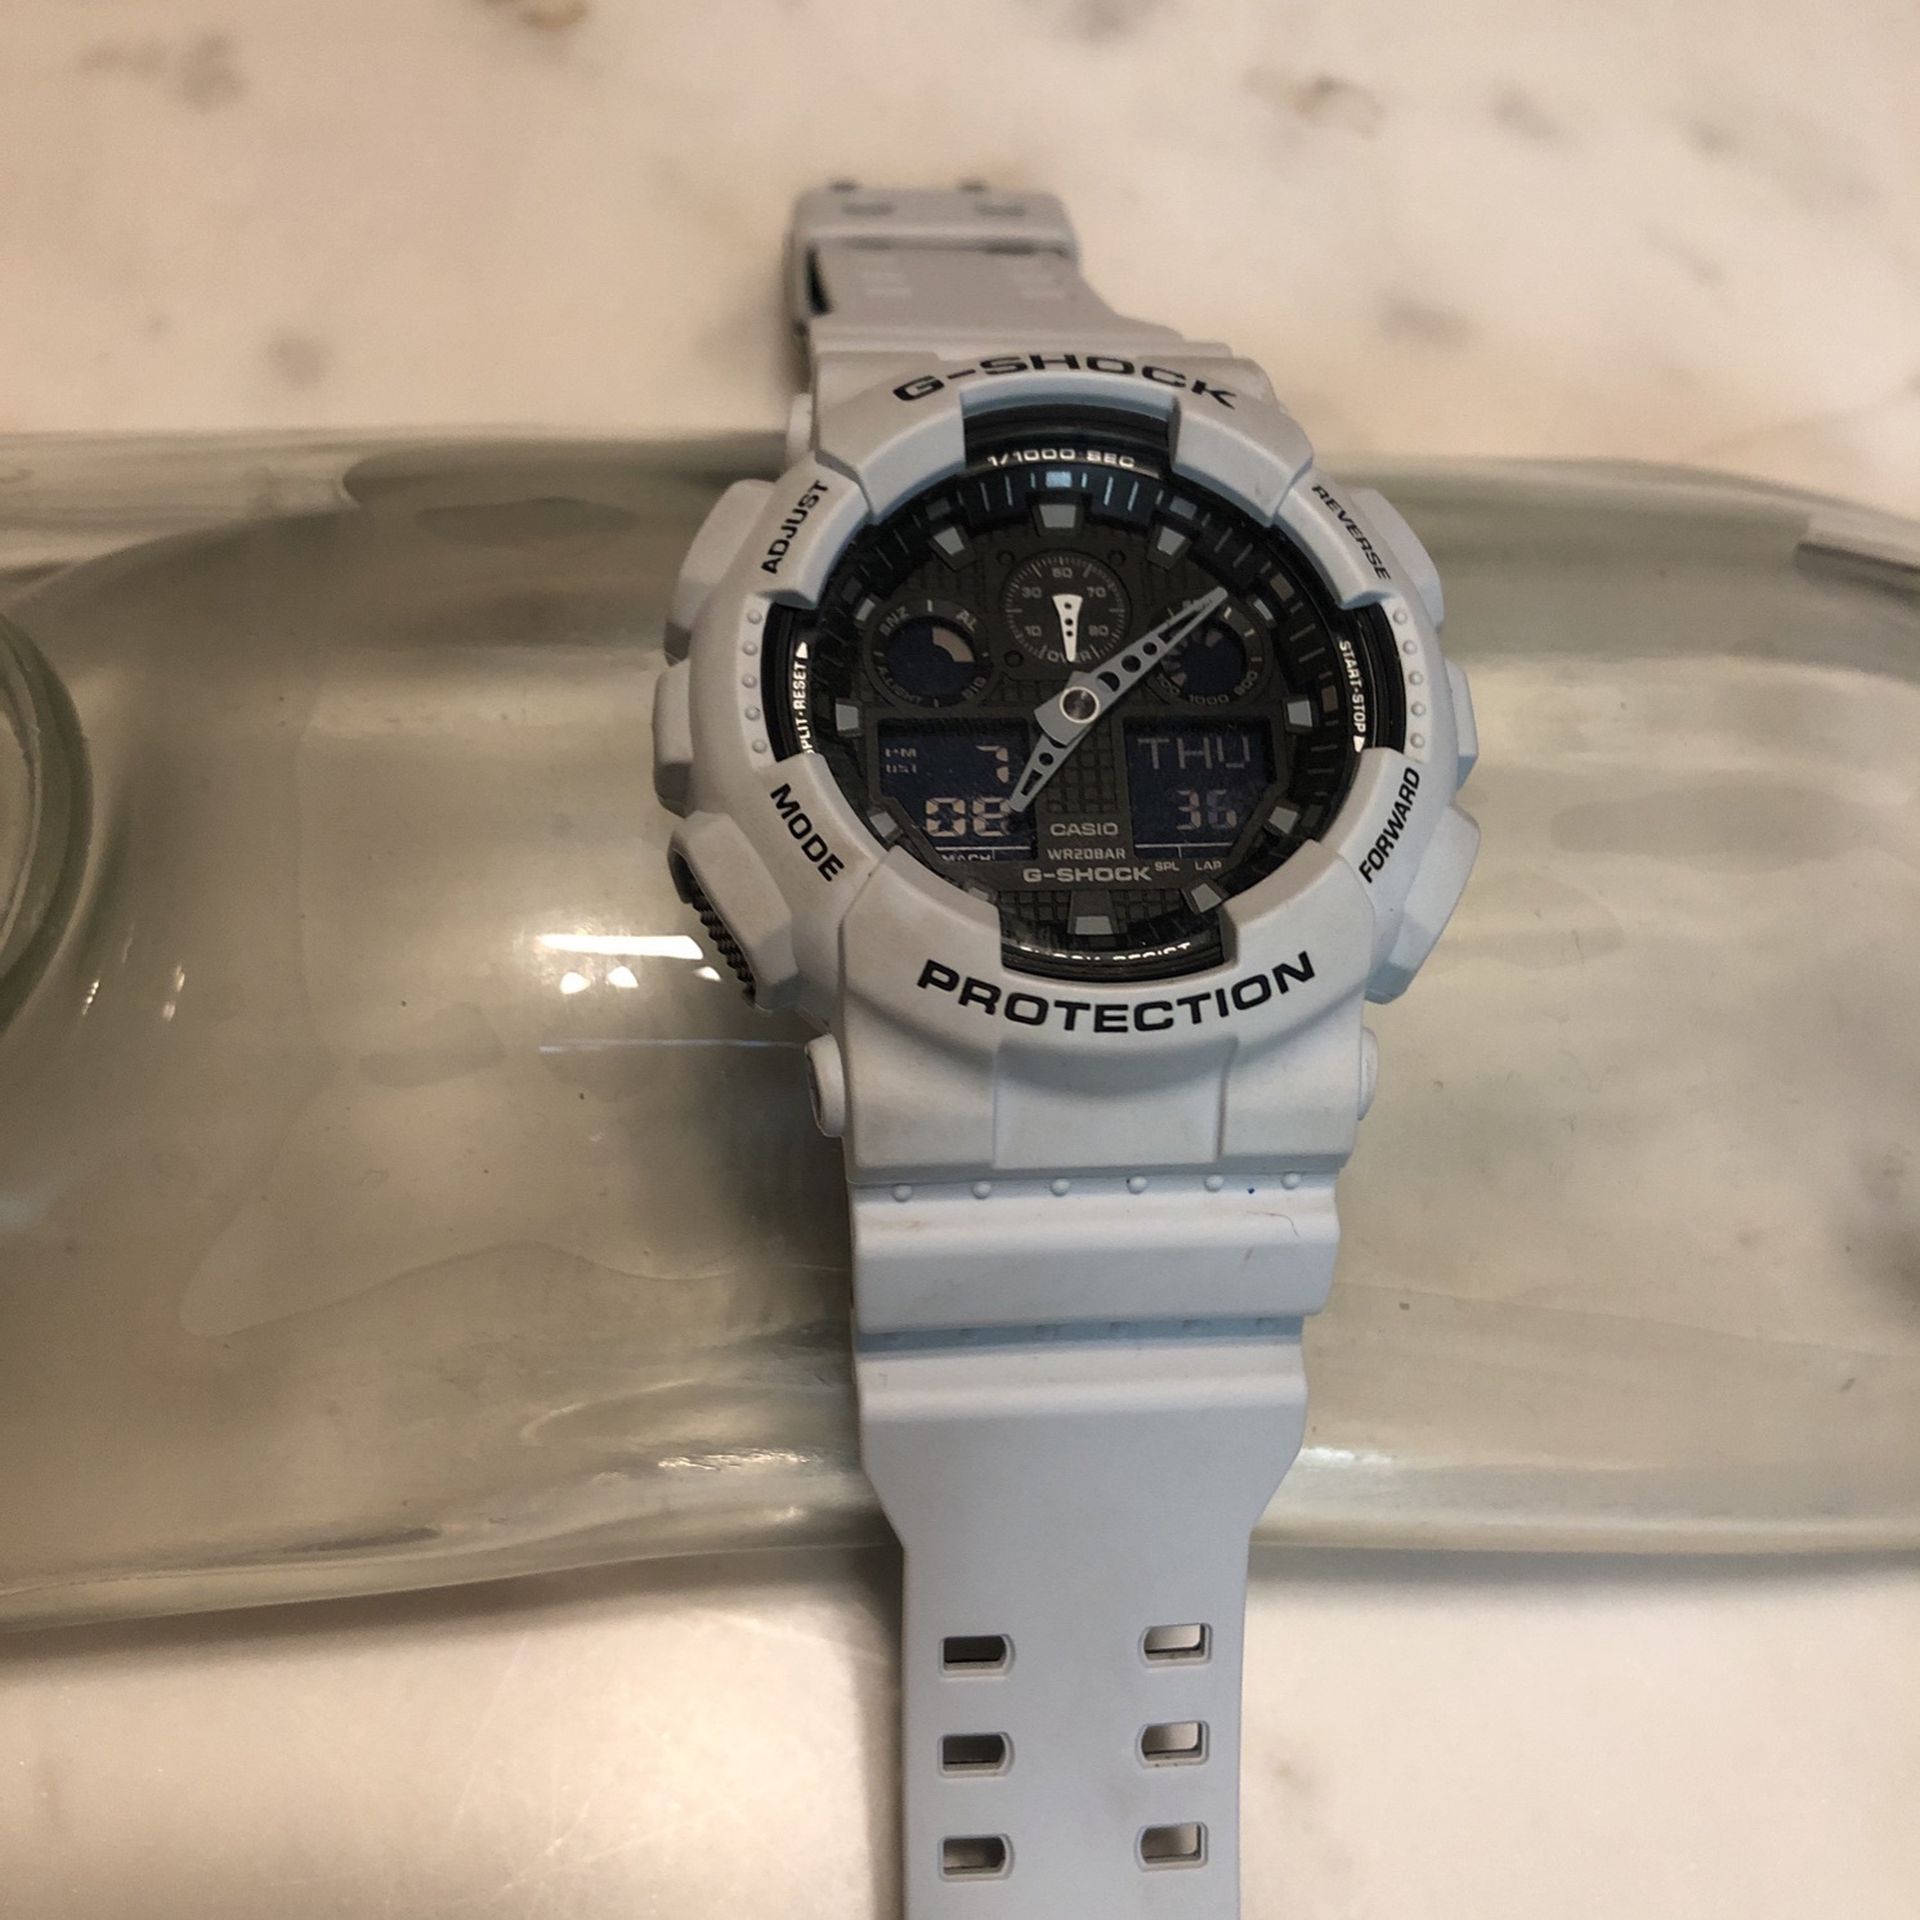 G-Shock protection watch